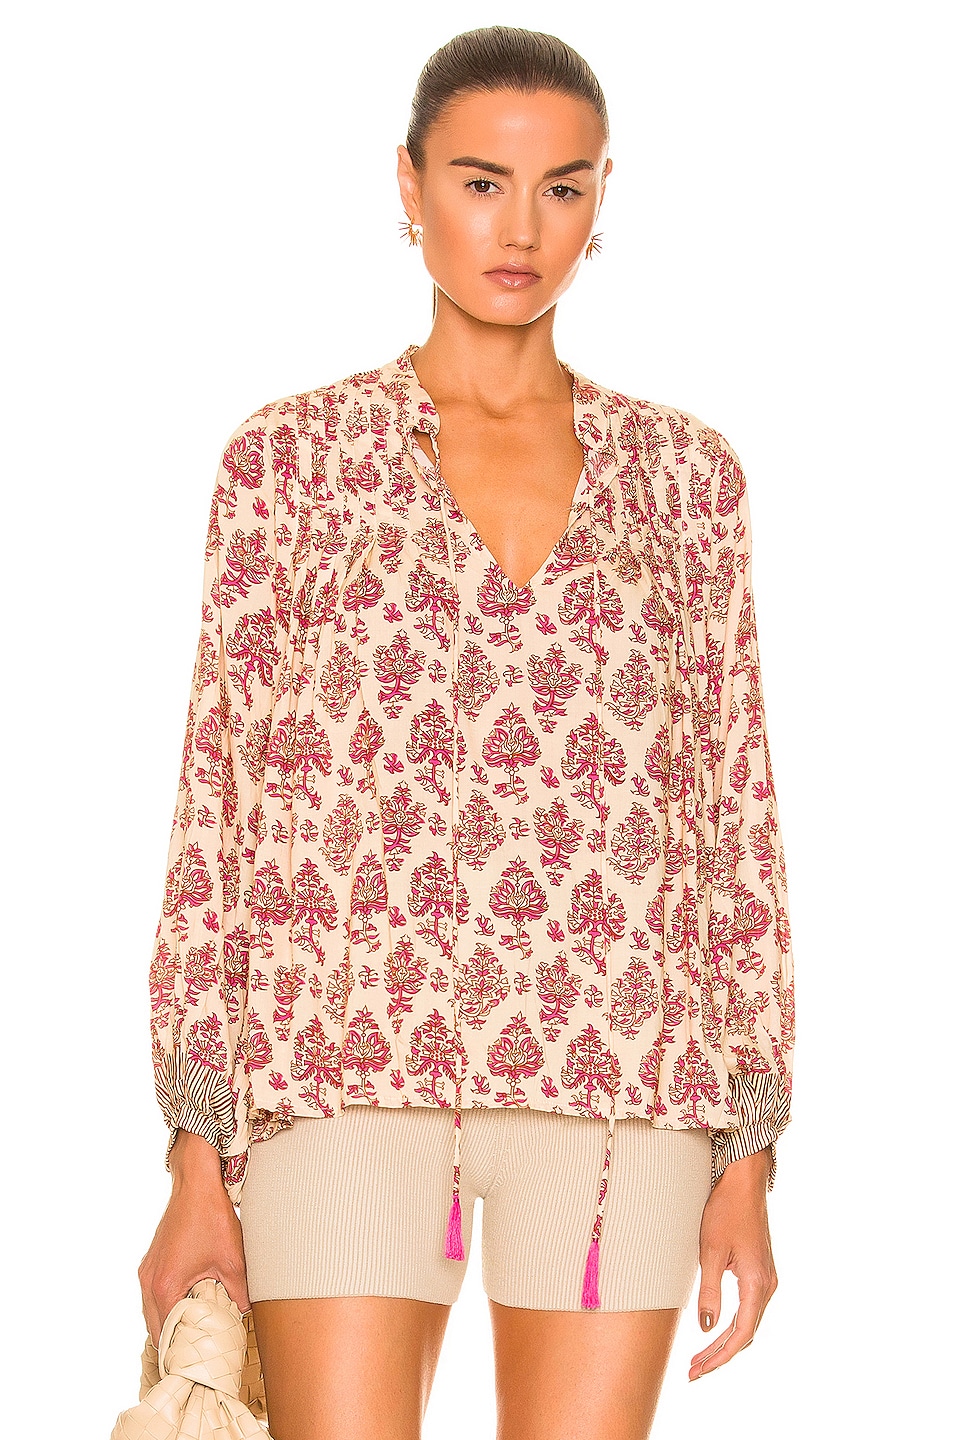 Image 1 of Natalie Martin Lizzy Shirt in Cyprus Print Pink